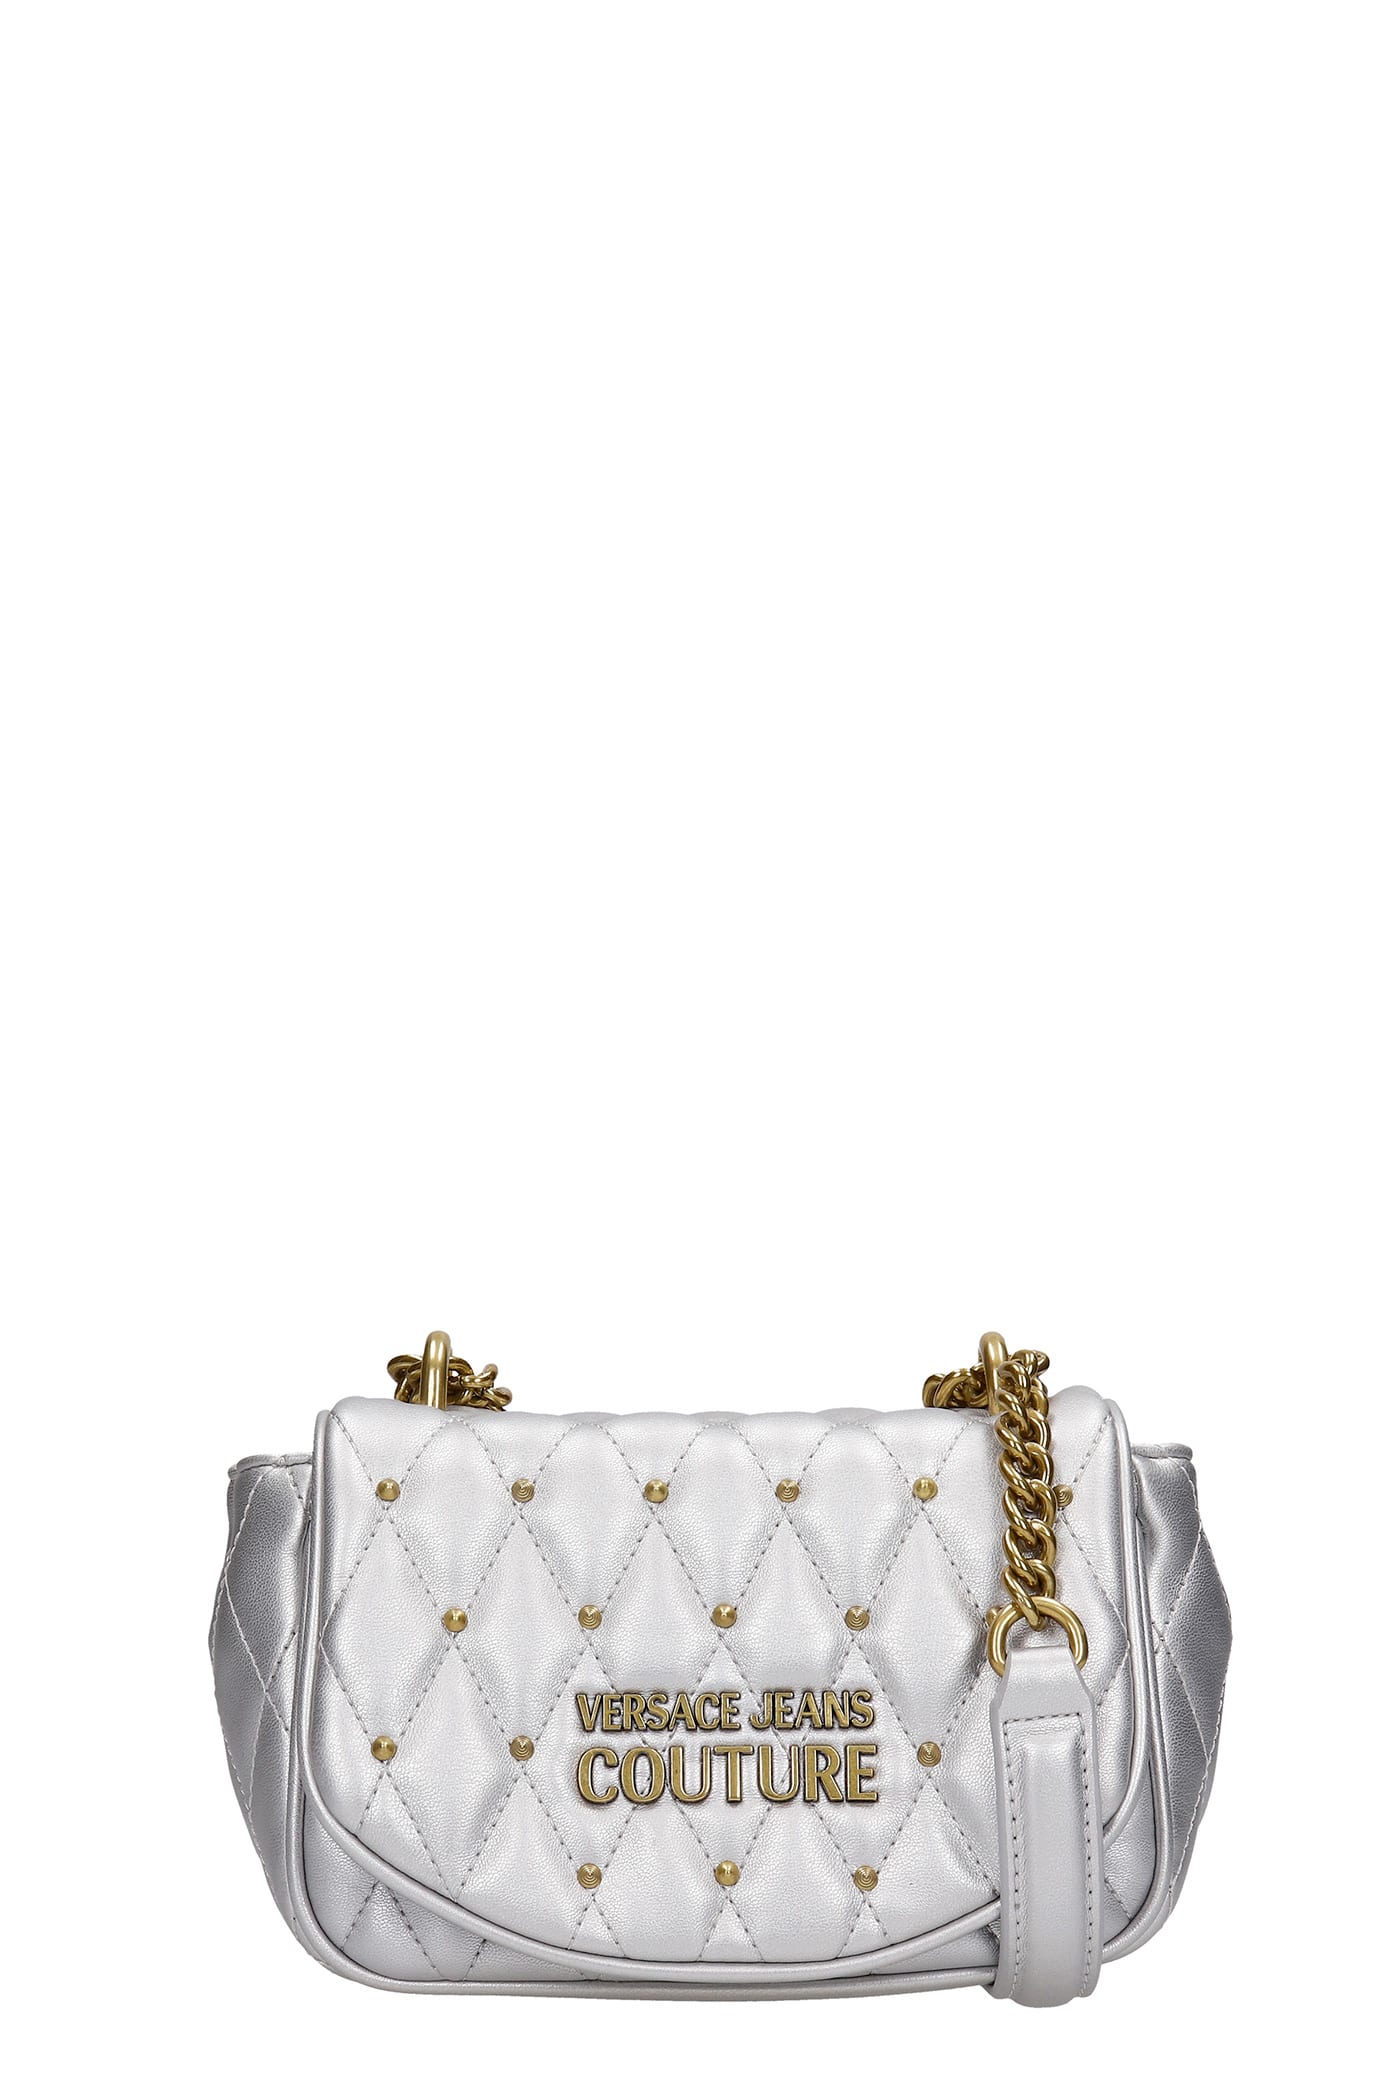 Versace Jeans Couture Shoulder Bag In Silver Faux Leather